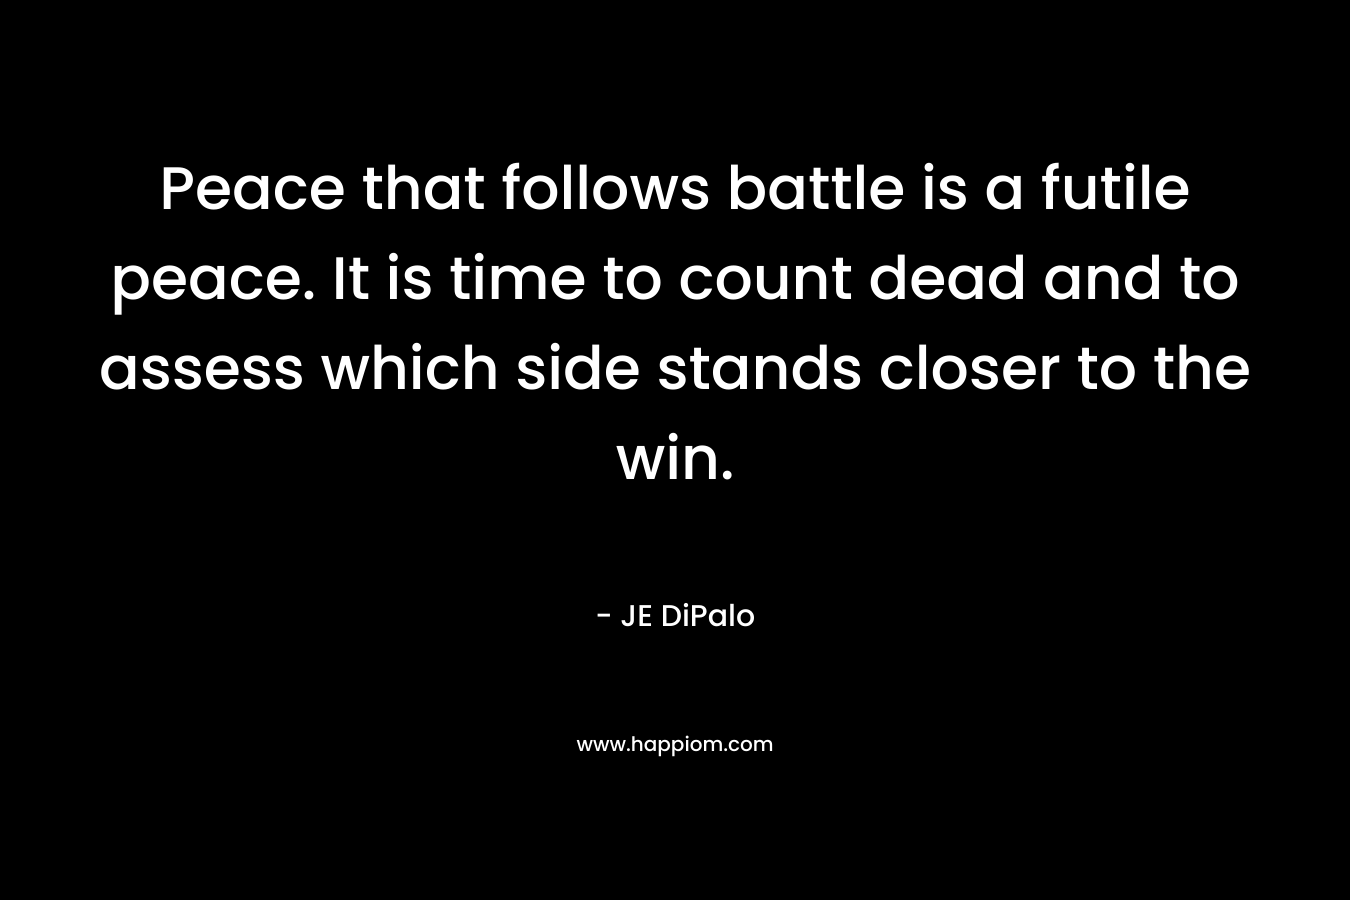 Peace that follows battle is a futile peace. It is time to count dead and to assess which side stands closer to the win.